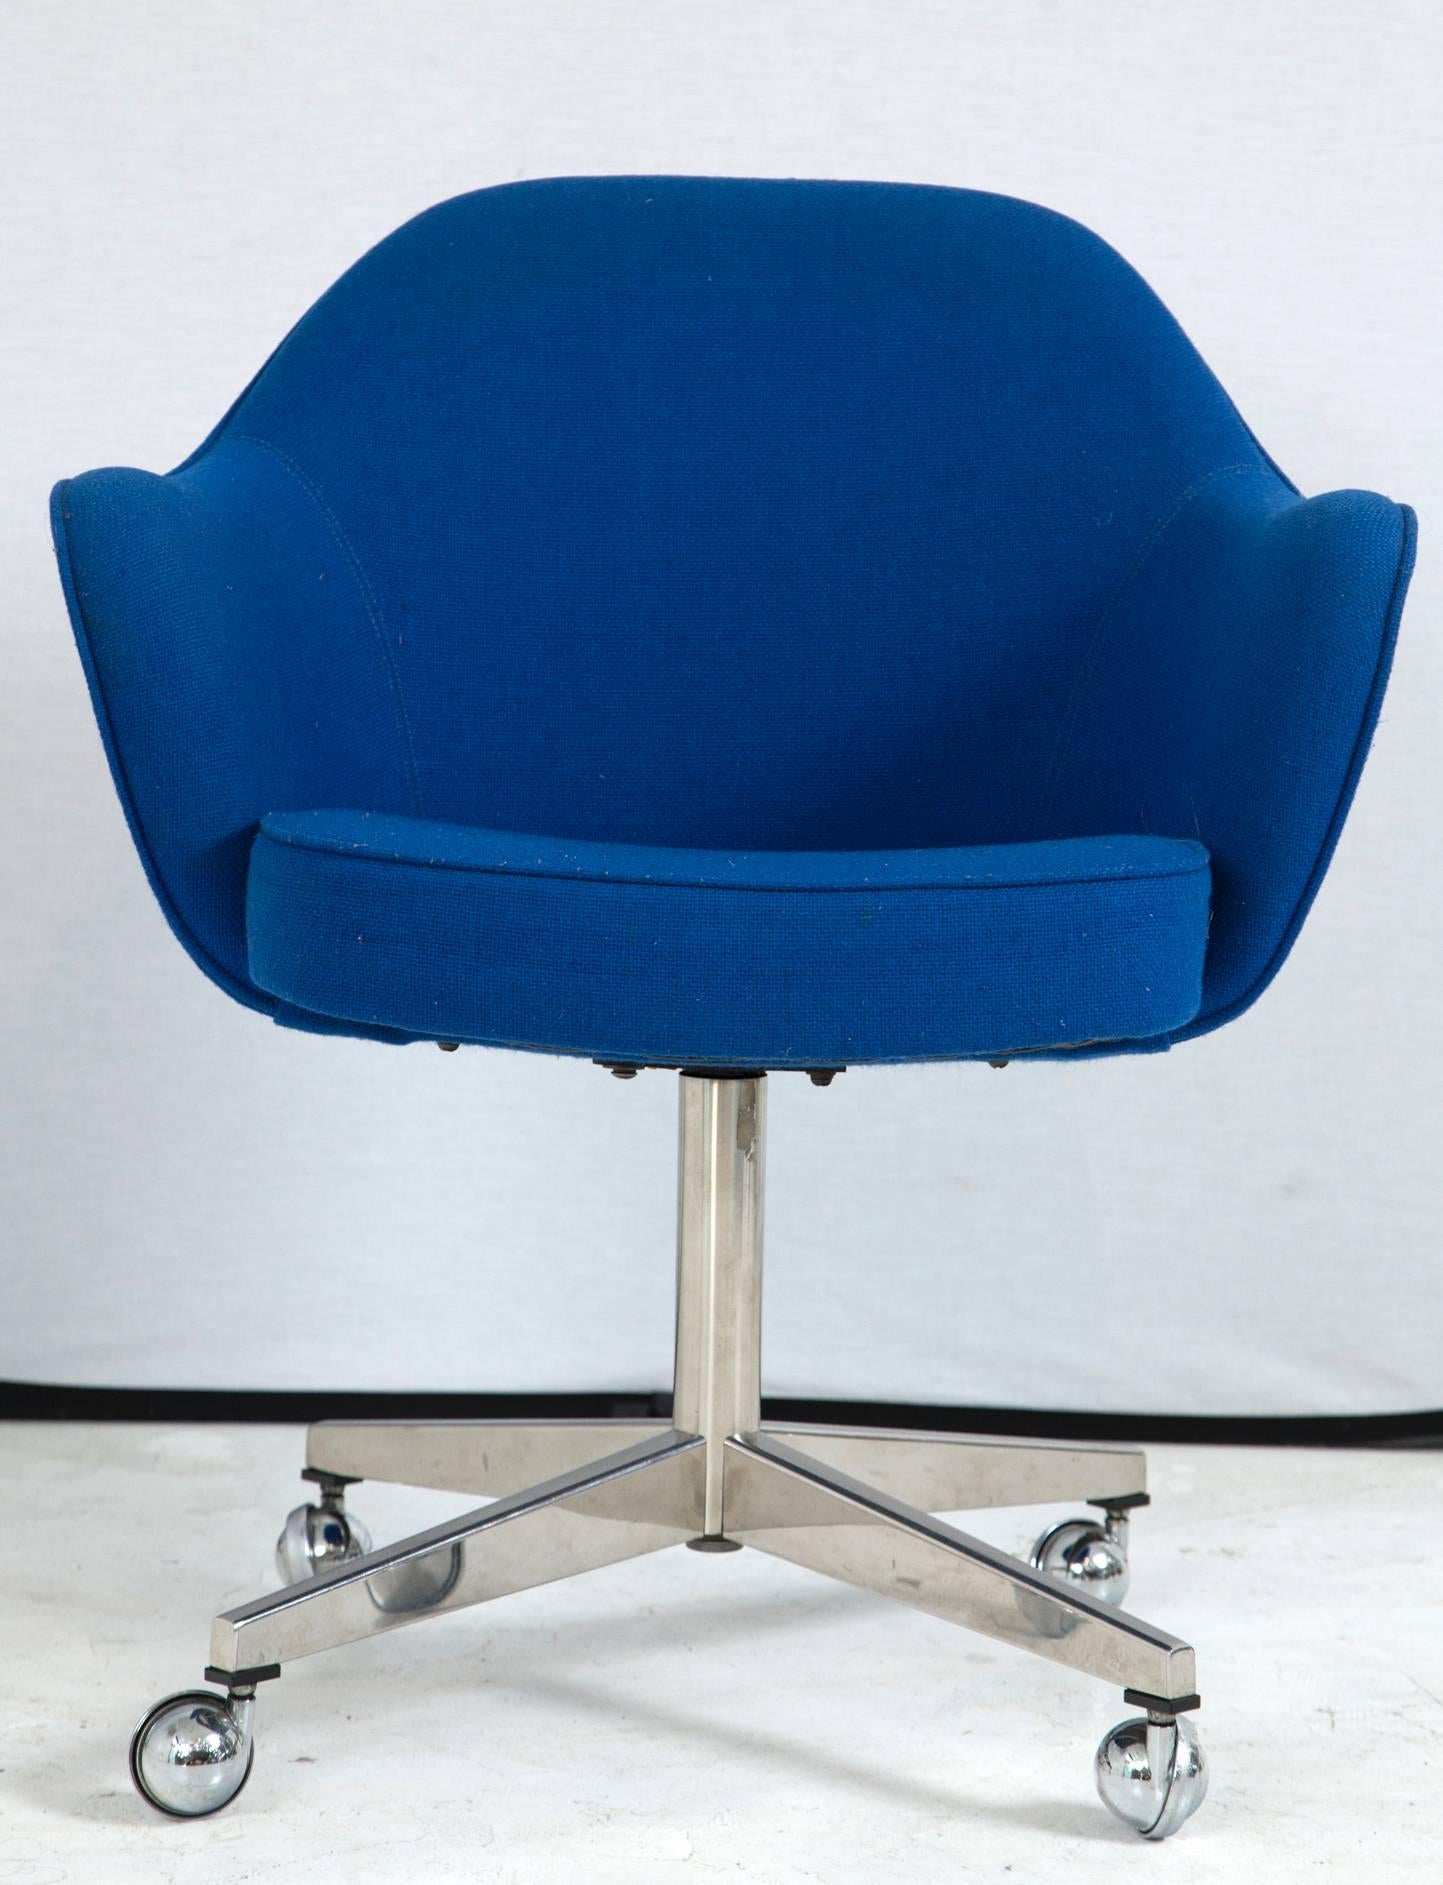 A wonderful find. This vintage Knoll desk chair was salvaged from a closing GE warehouse in Connecticut. We chose not to newly upholster it because of the richness in the vintage blue textured wool. The upholstery is in excellent condition